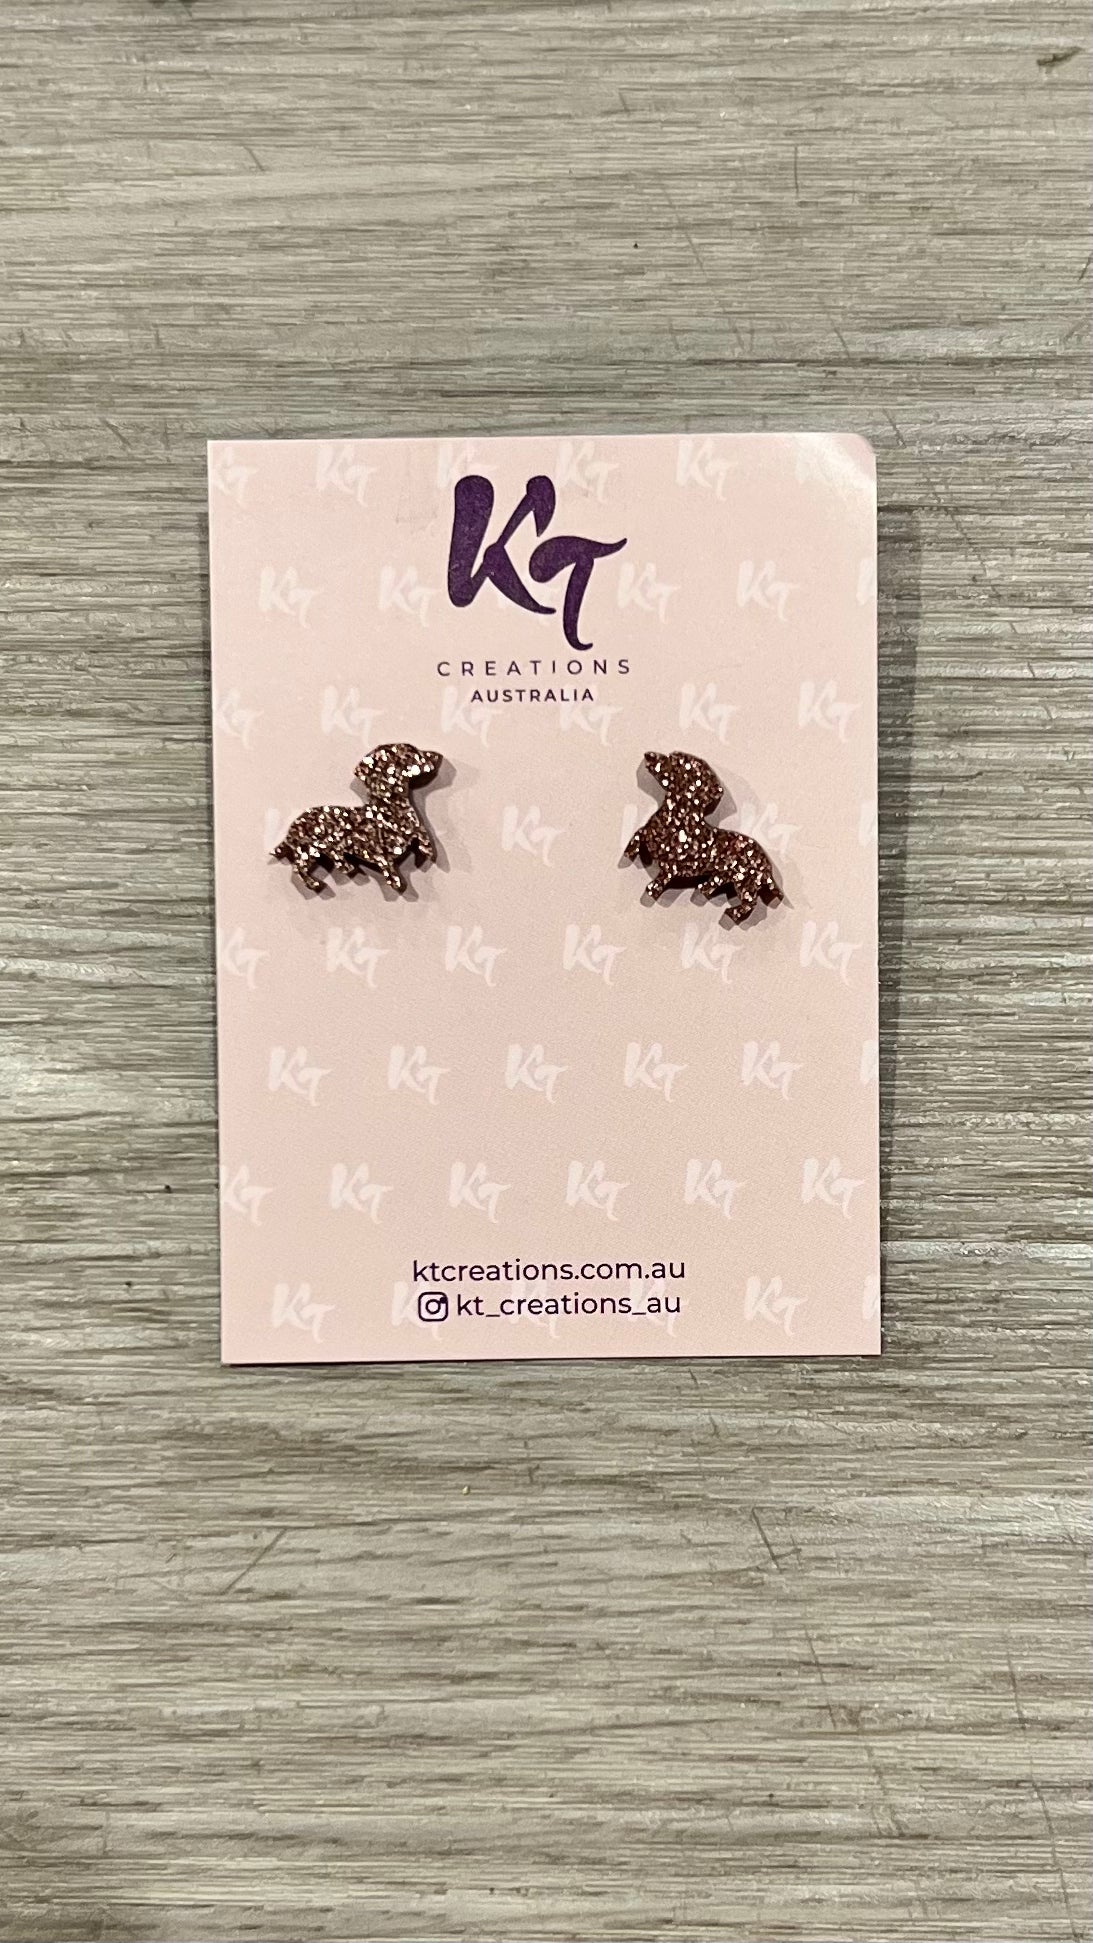 Acrylic Stud Earrings: Acrylic earrings are lightweight to wear and the perfect accessory to every outfit. Handmade in Brisbane.
Stud backing made from surgical steel, perfect for sensitiv - Ciao Bella Dresses 